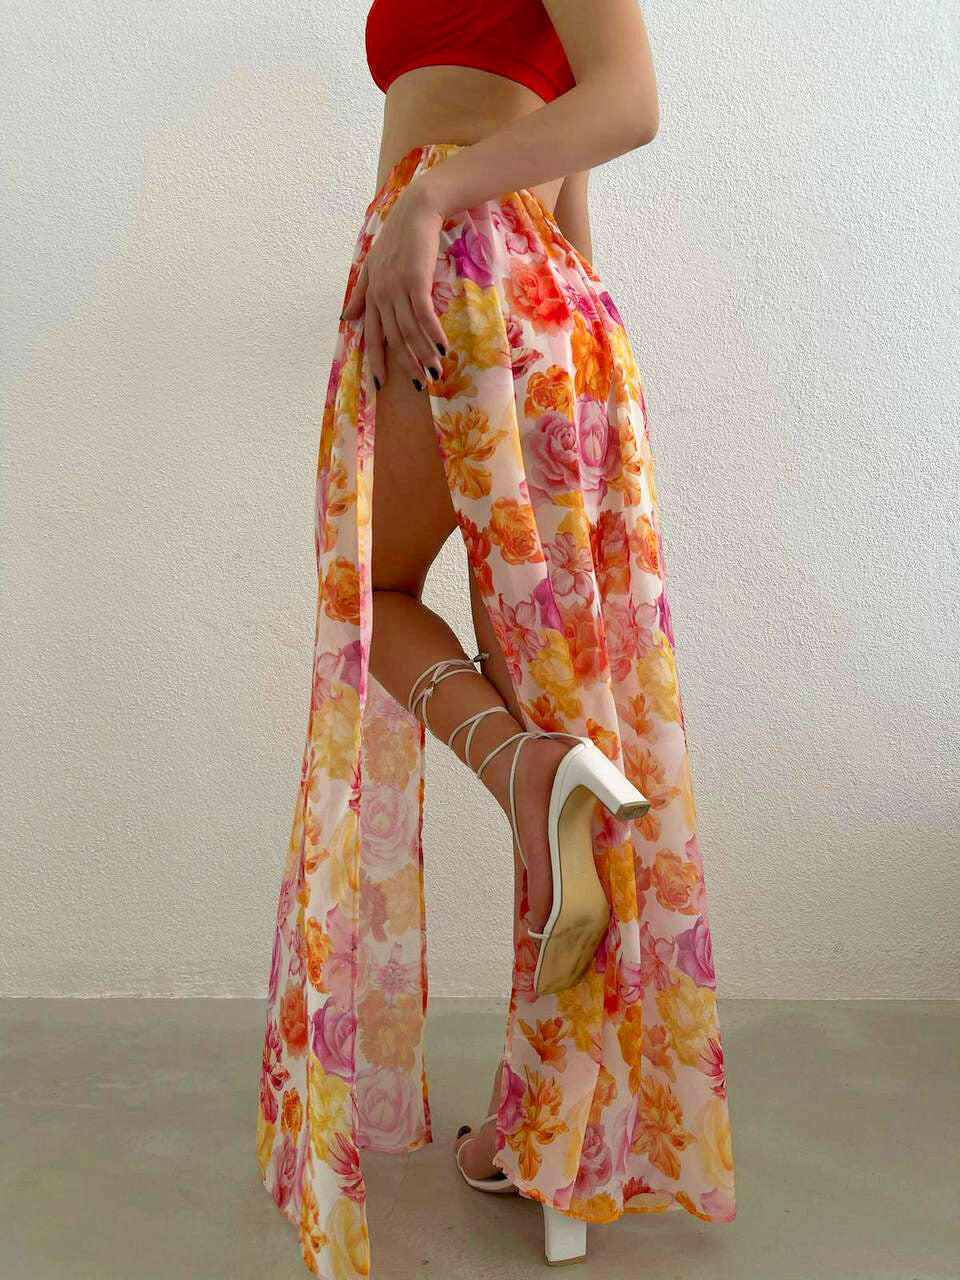 Both Side Slit Colorful Pareo in Orange-White - Noxlook